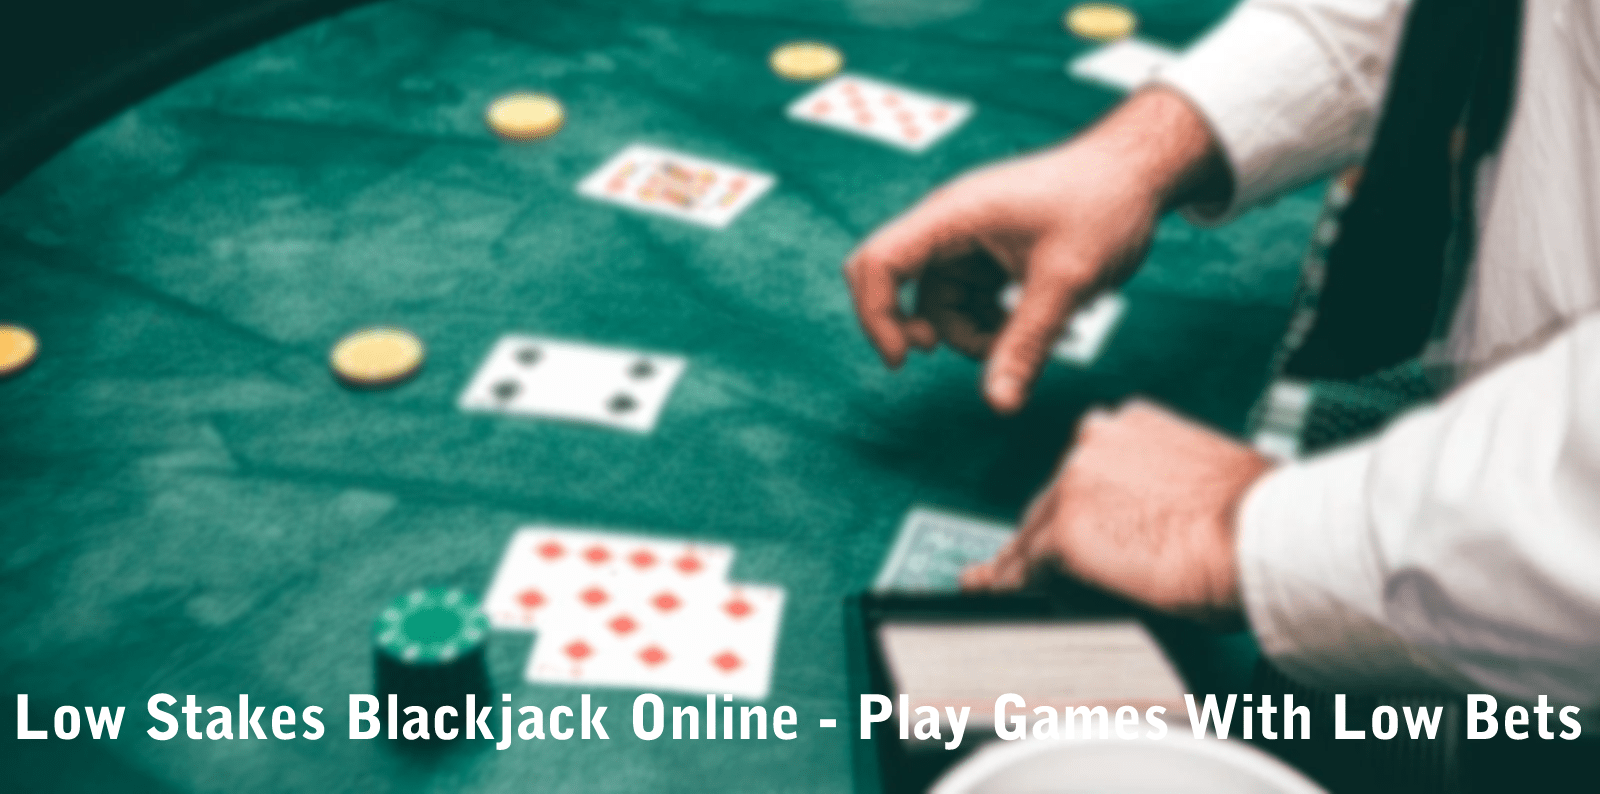 Low Stakes Blackjack Online - Play Games With Low Bets